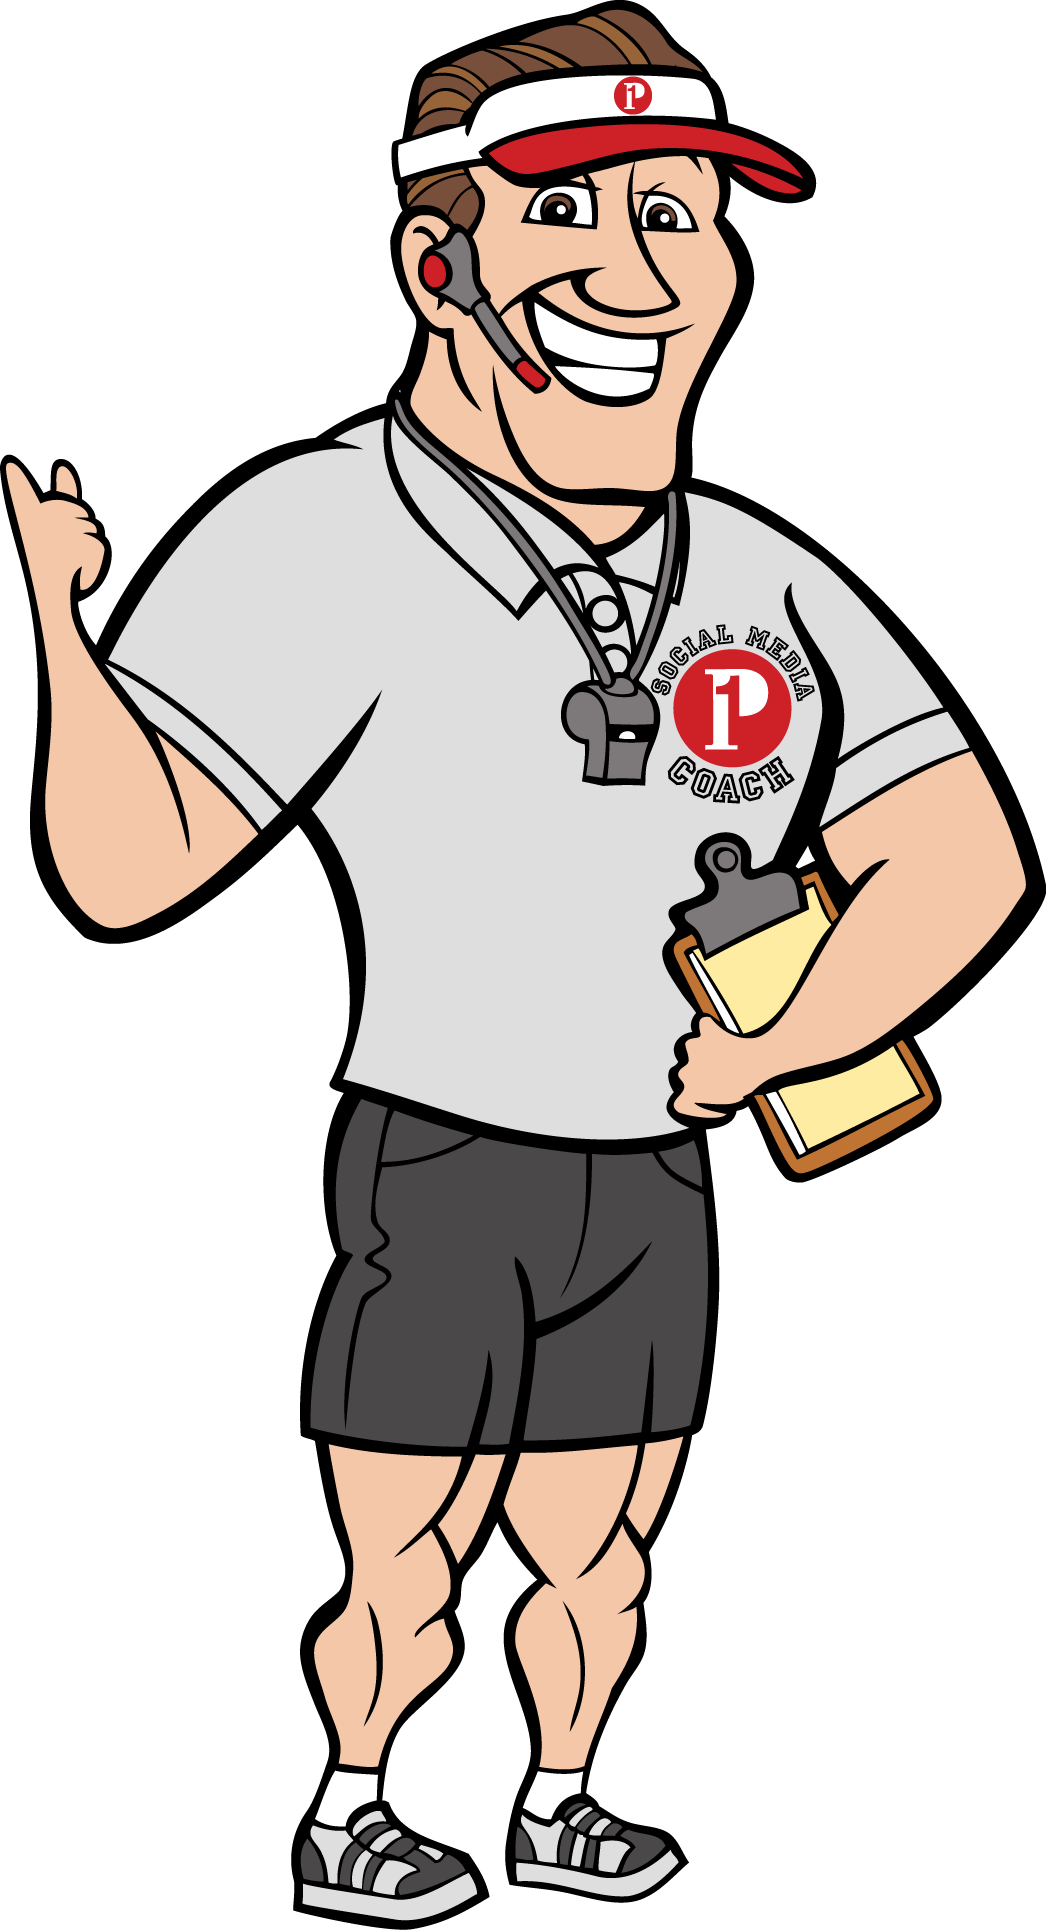 Who can a leader. Coach clipart athletic coach